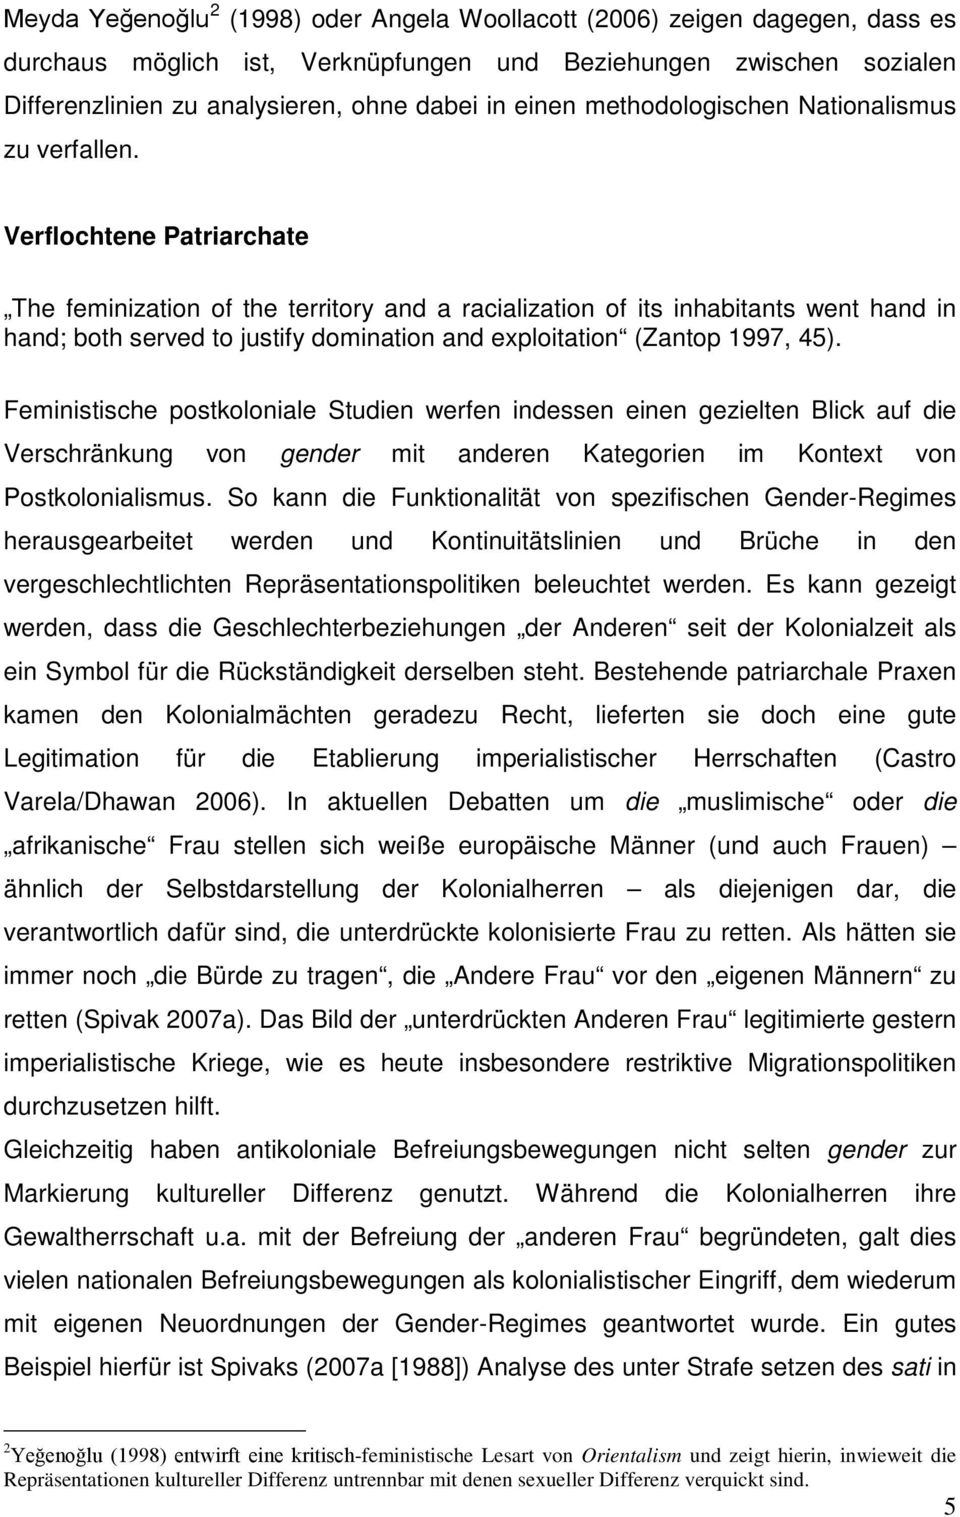 Verflochtene Patriarchate The feminization of the territory and a racialization of its inhabitants went hand in hand; both served to justify domination and exploitation (Zantop 1997, 45).